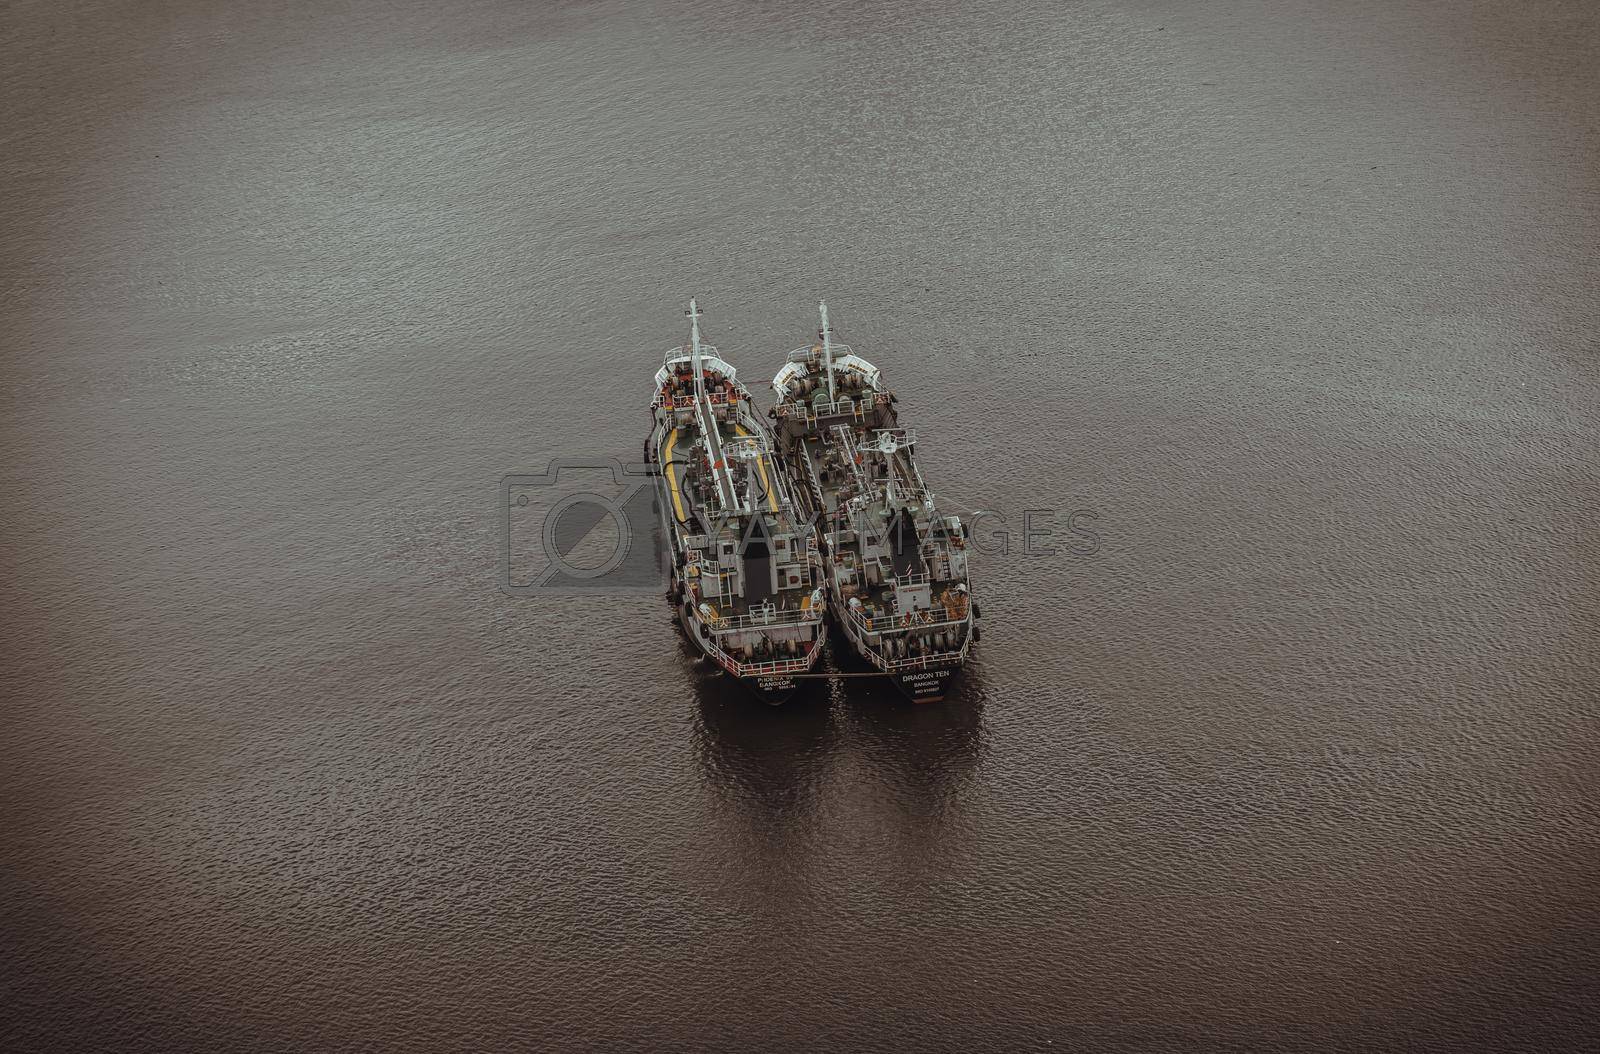 Bangkok, Thailand - 22 Mar, 2022 : Two cargo ships parked in the middle of the Chao phraya river on water background. Copy space, Selective focus.